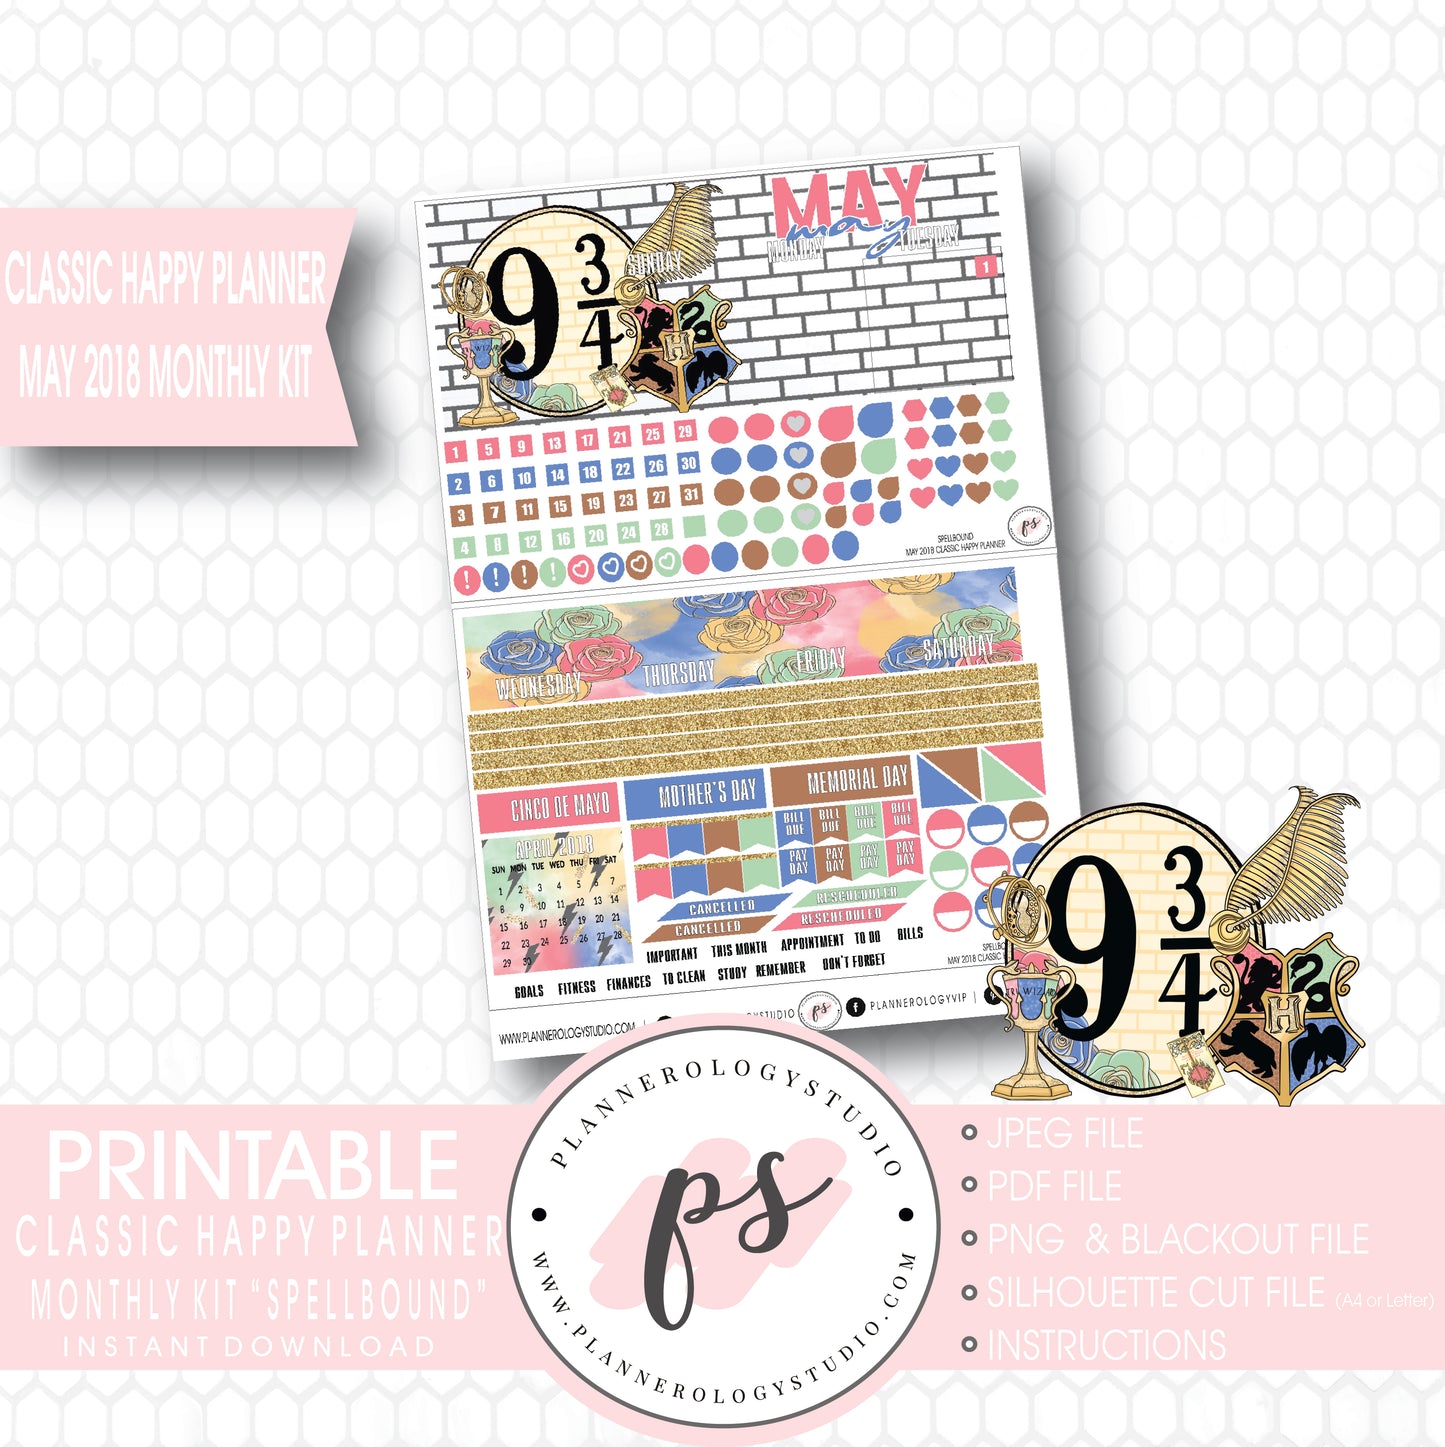 Spellbound (Harry Potter) May 2018 Monthly View Kit Digital Printable Planner Stickers (for use with Classic Happy Planner) - Plannerologystudio